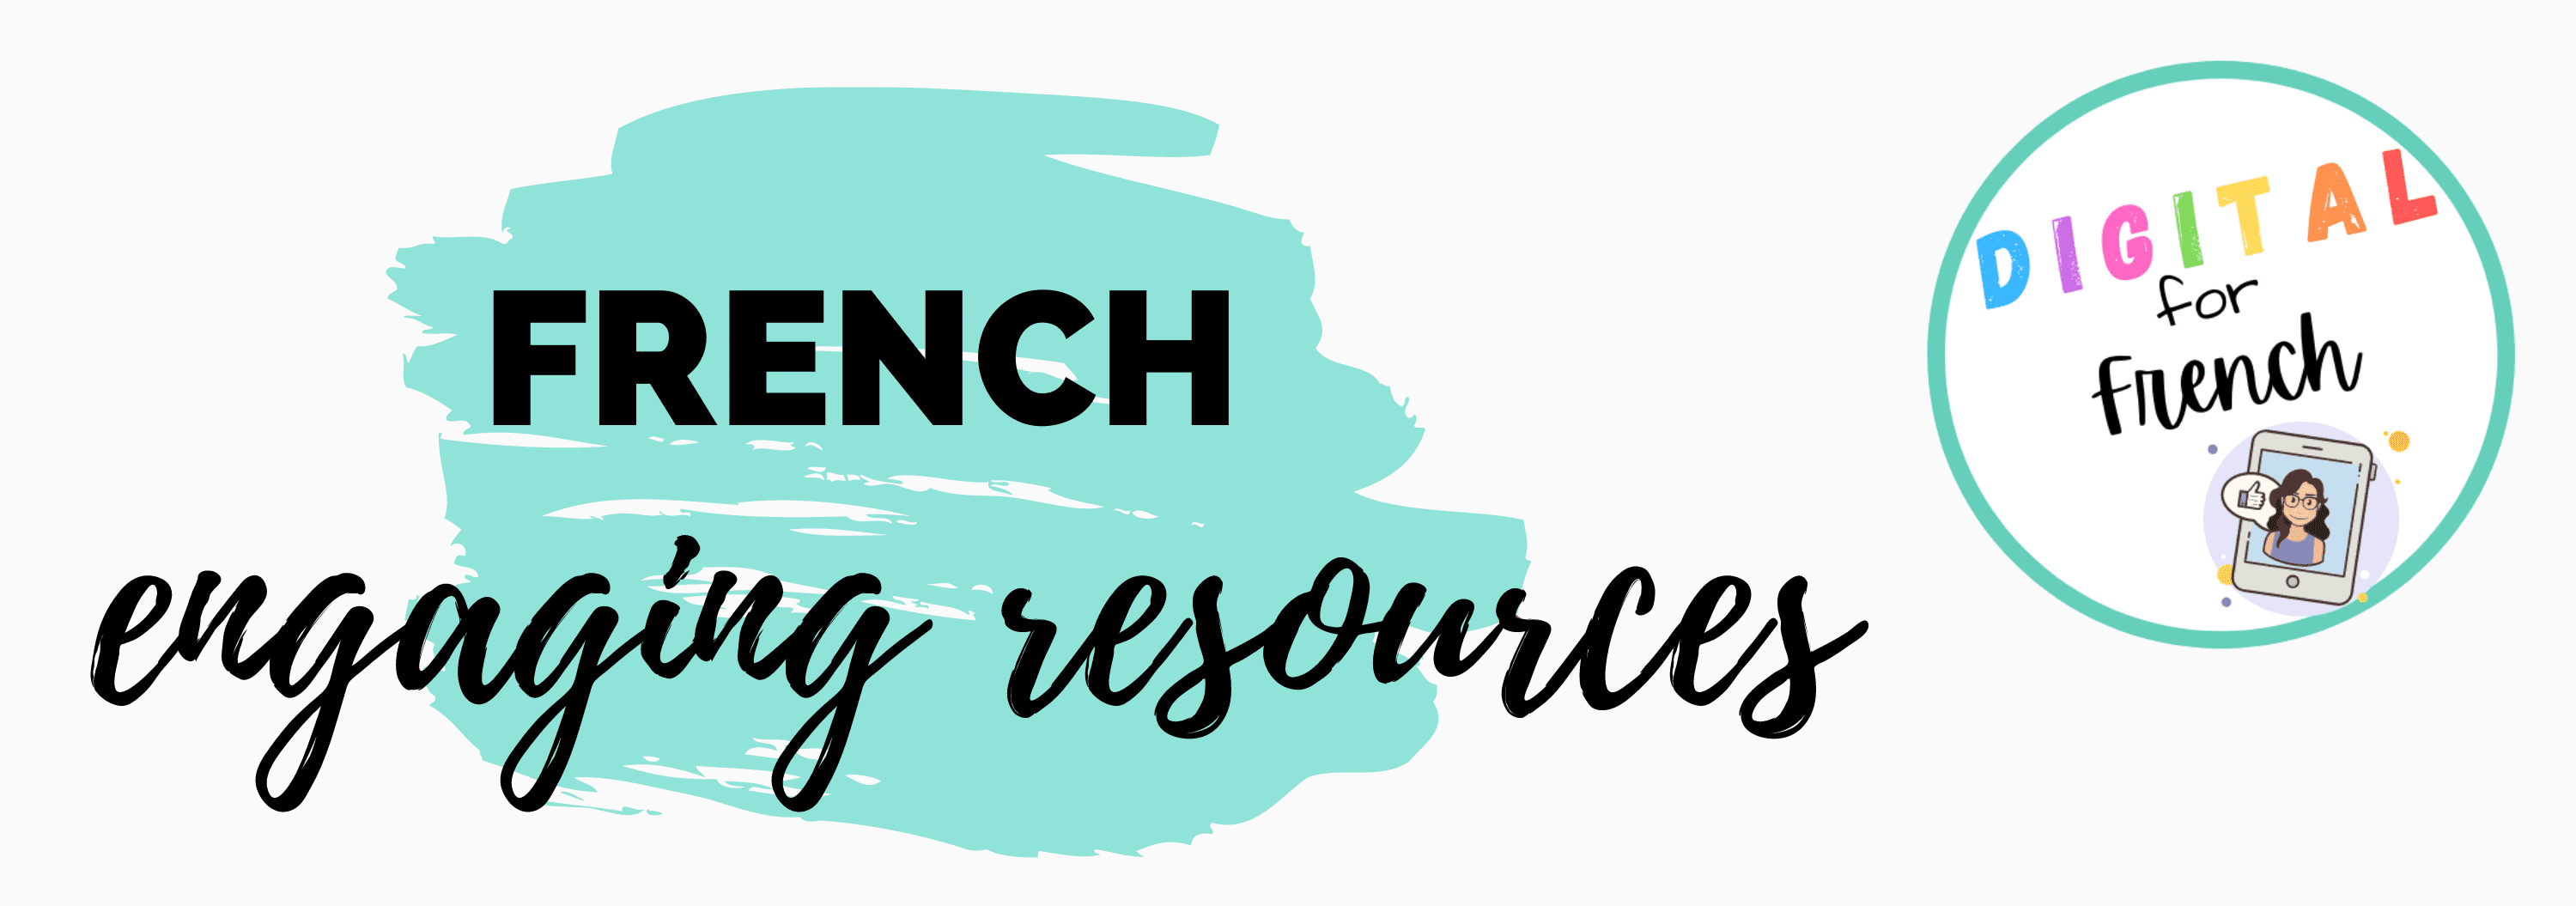 french engaging resources